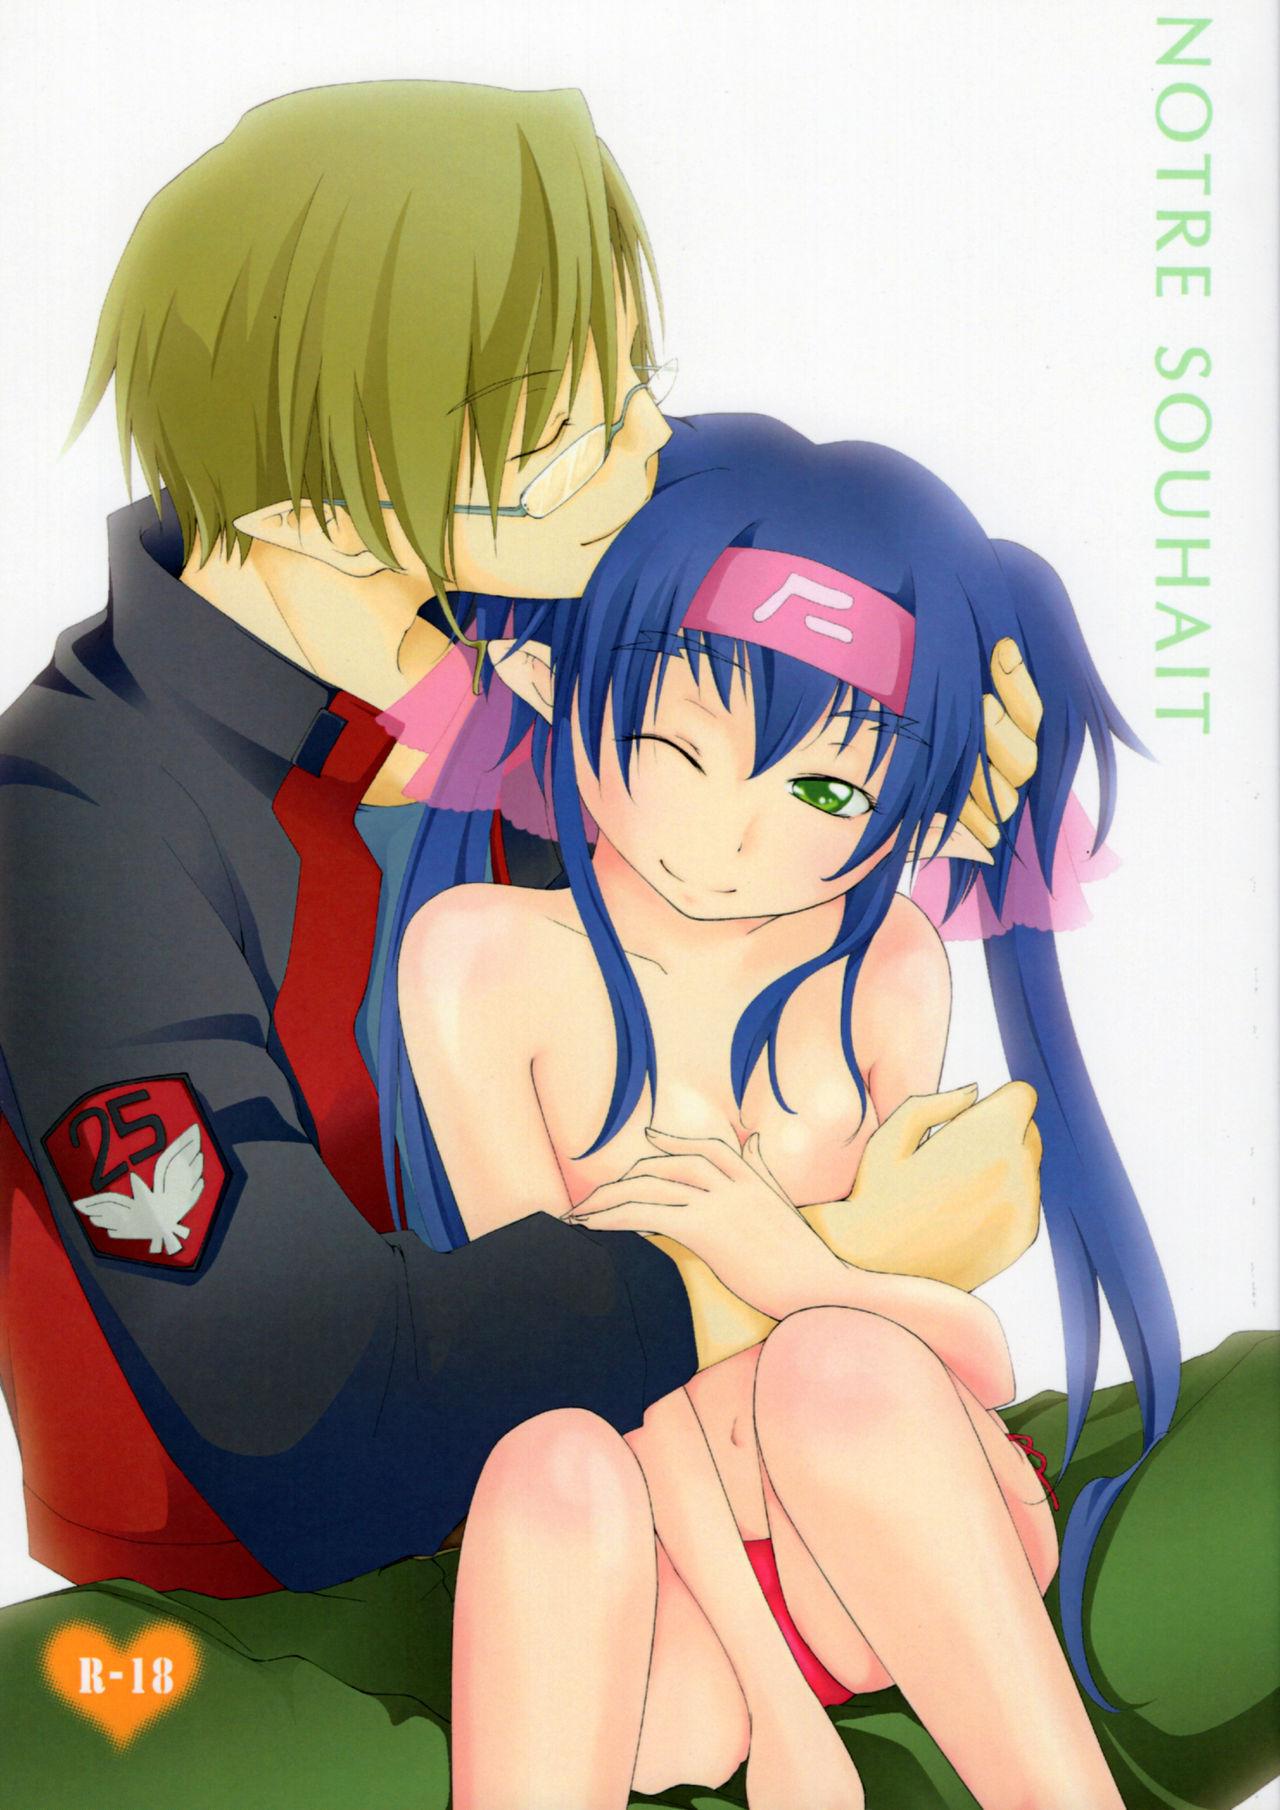 Blow Notre Souhait - Macross frontier Foreplay - Picture 1